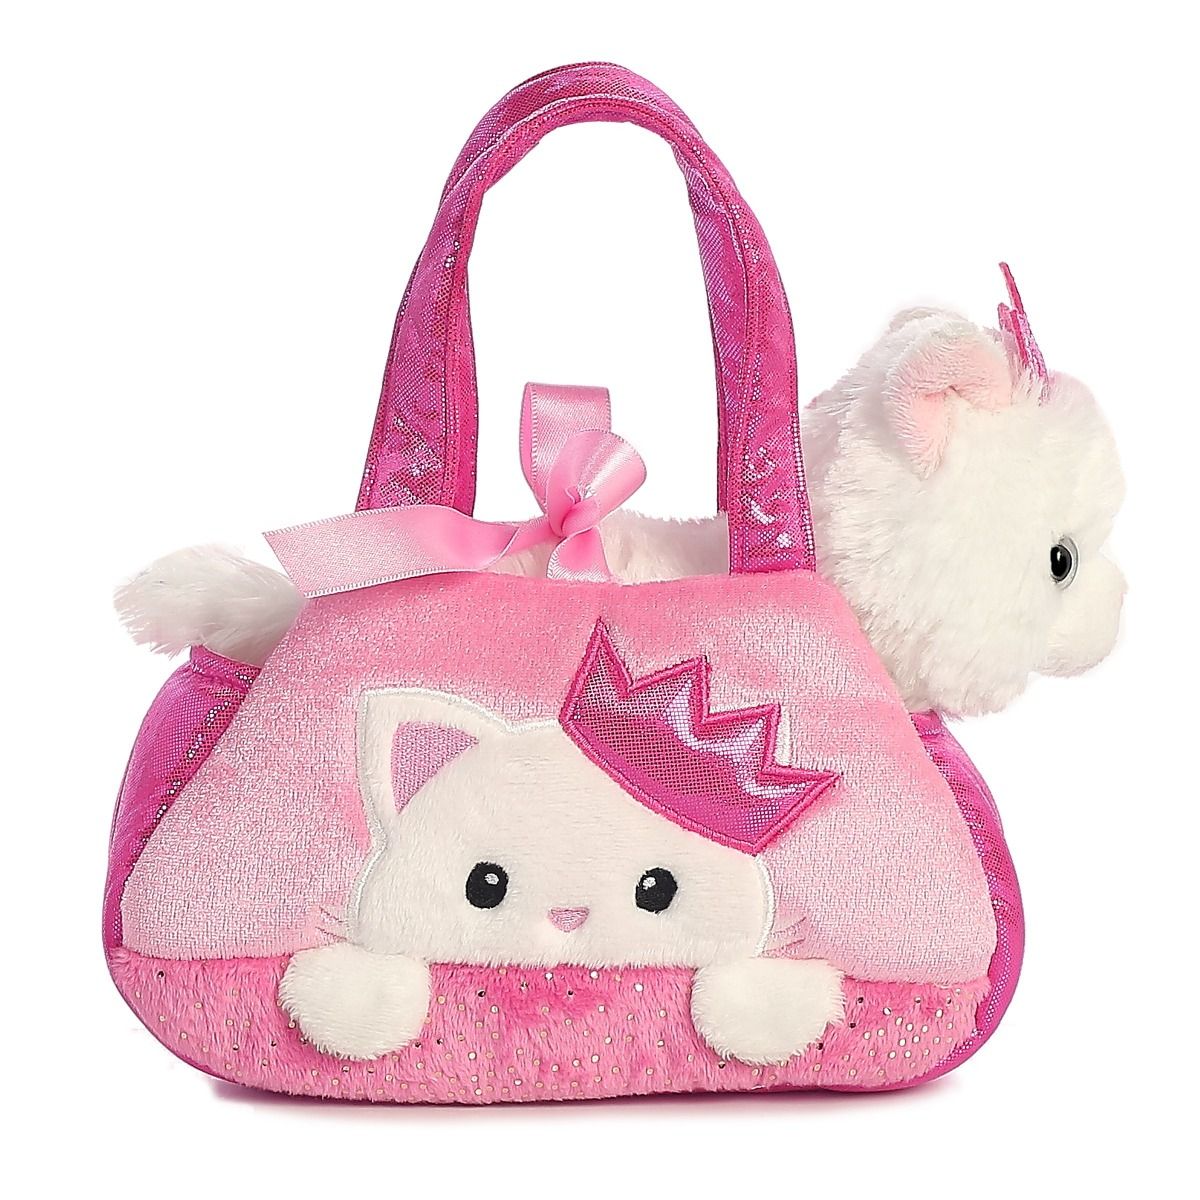 Harveys - This purr-fect pink cat coin purse is back in... | Facebook